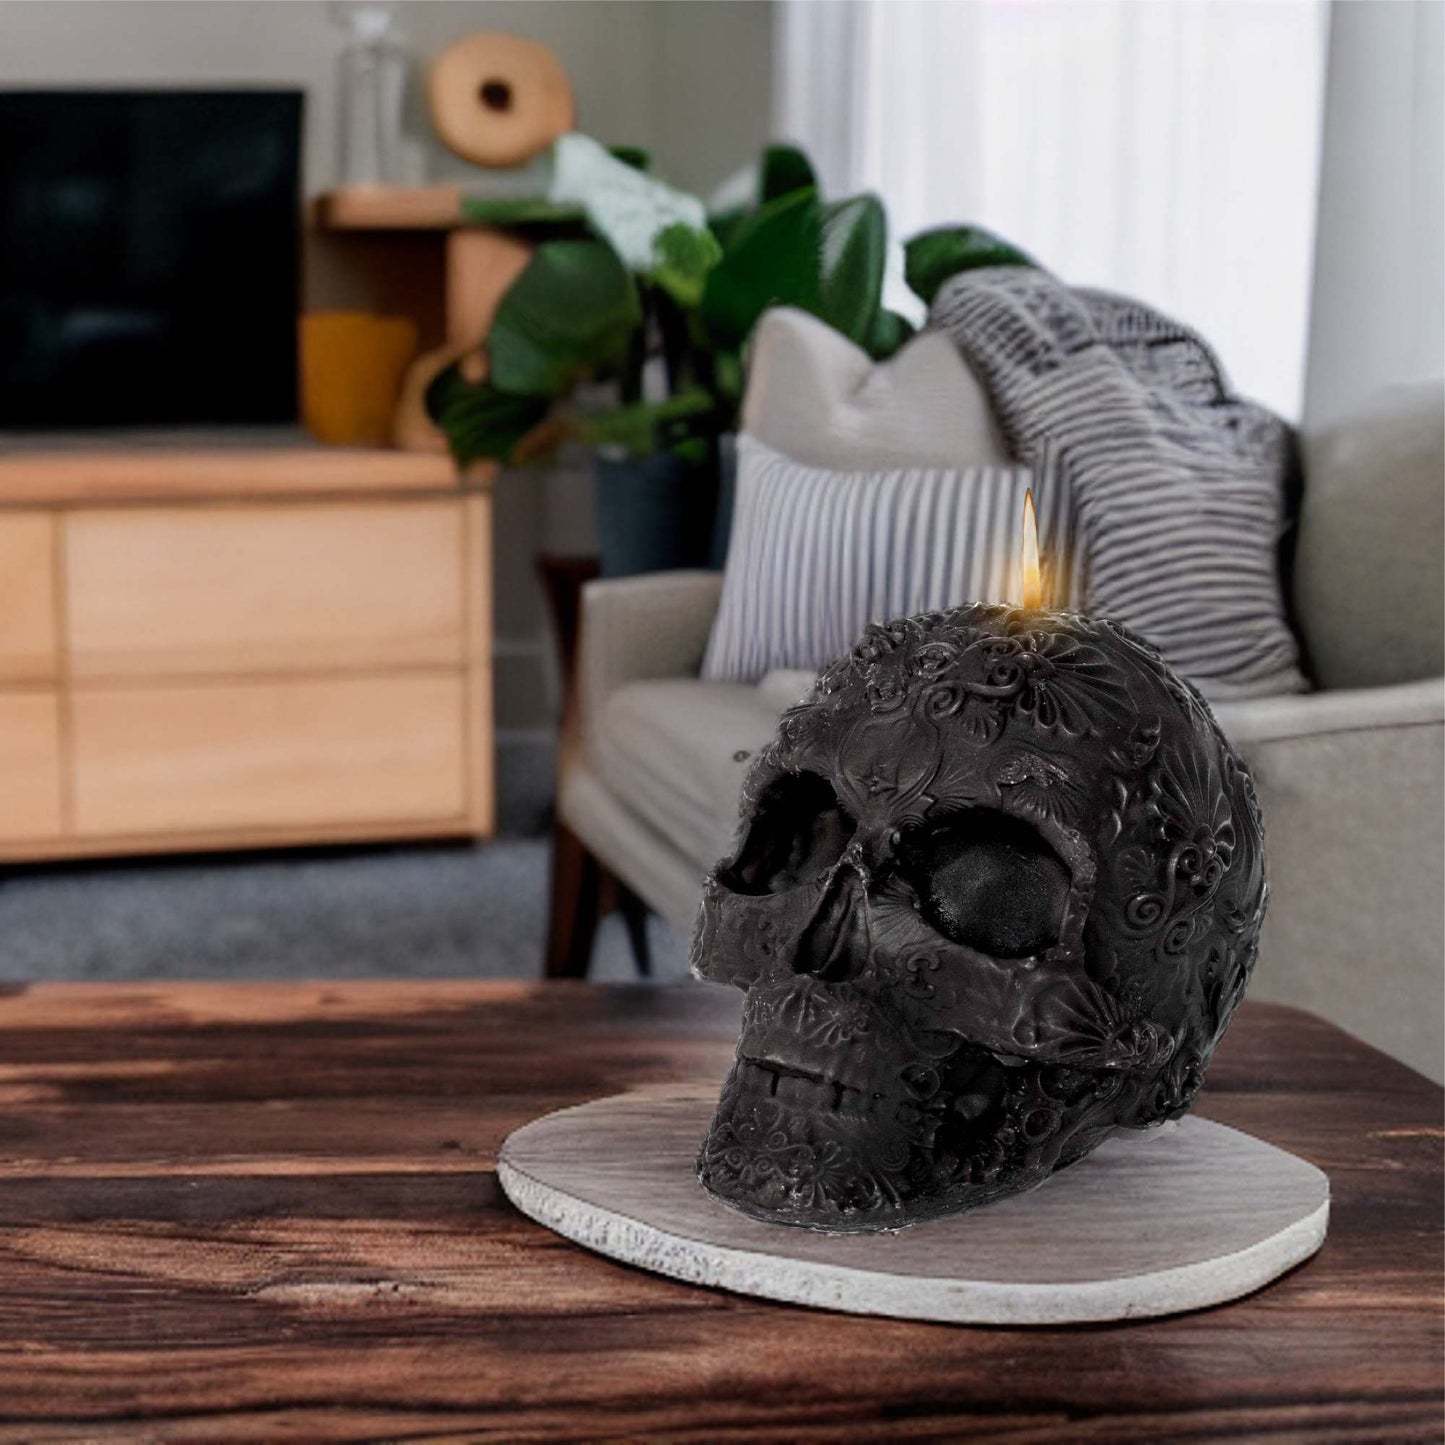 Deco Skull Candle